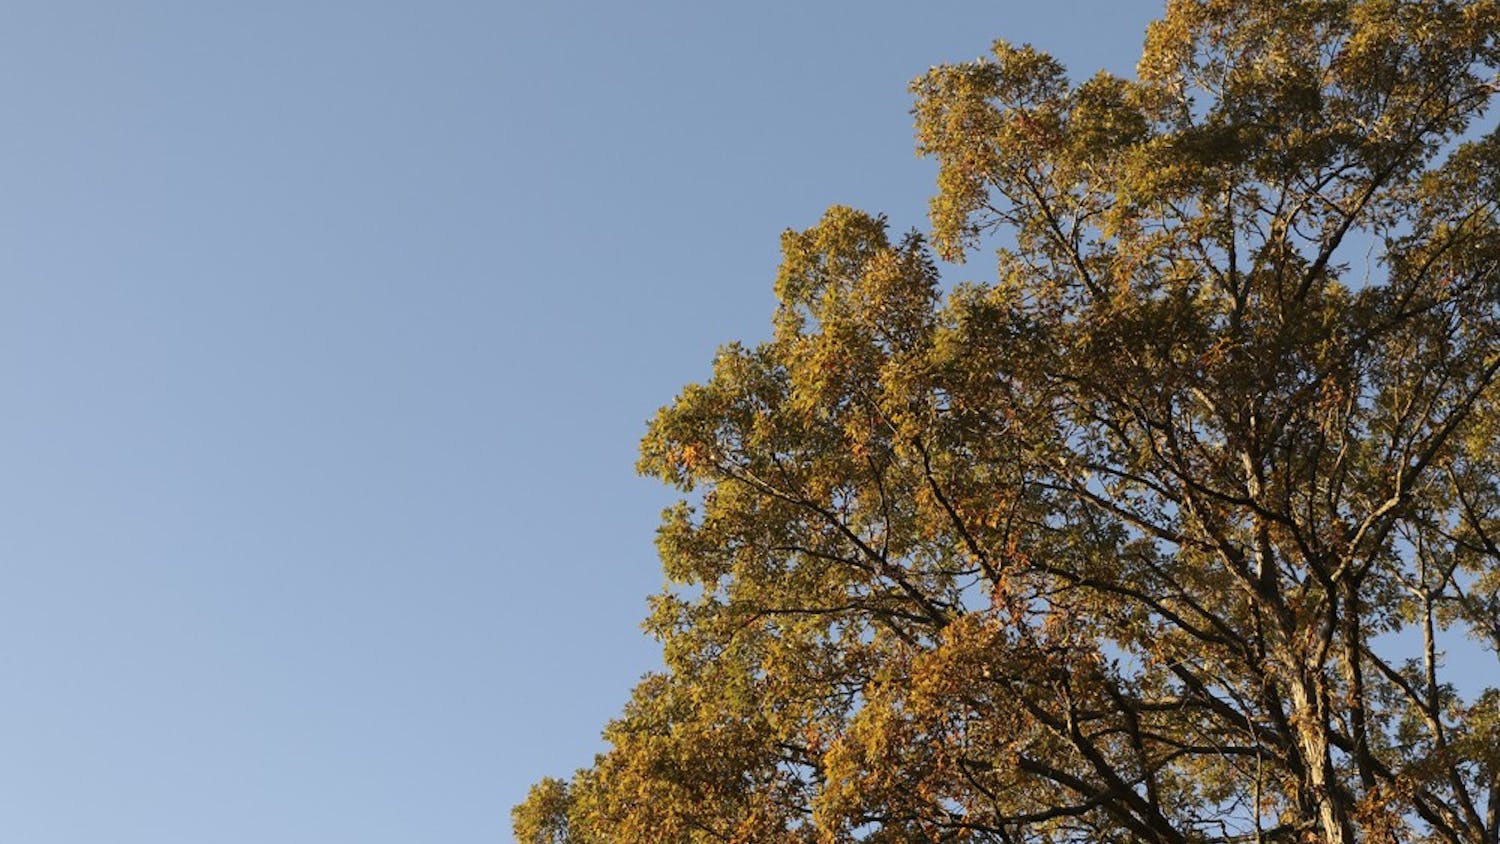 Chapel Hill will celebrate Arbor Day, a day to recognize trees and their importance,&nbsp;on Nov. 18.&nbsp;